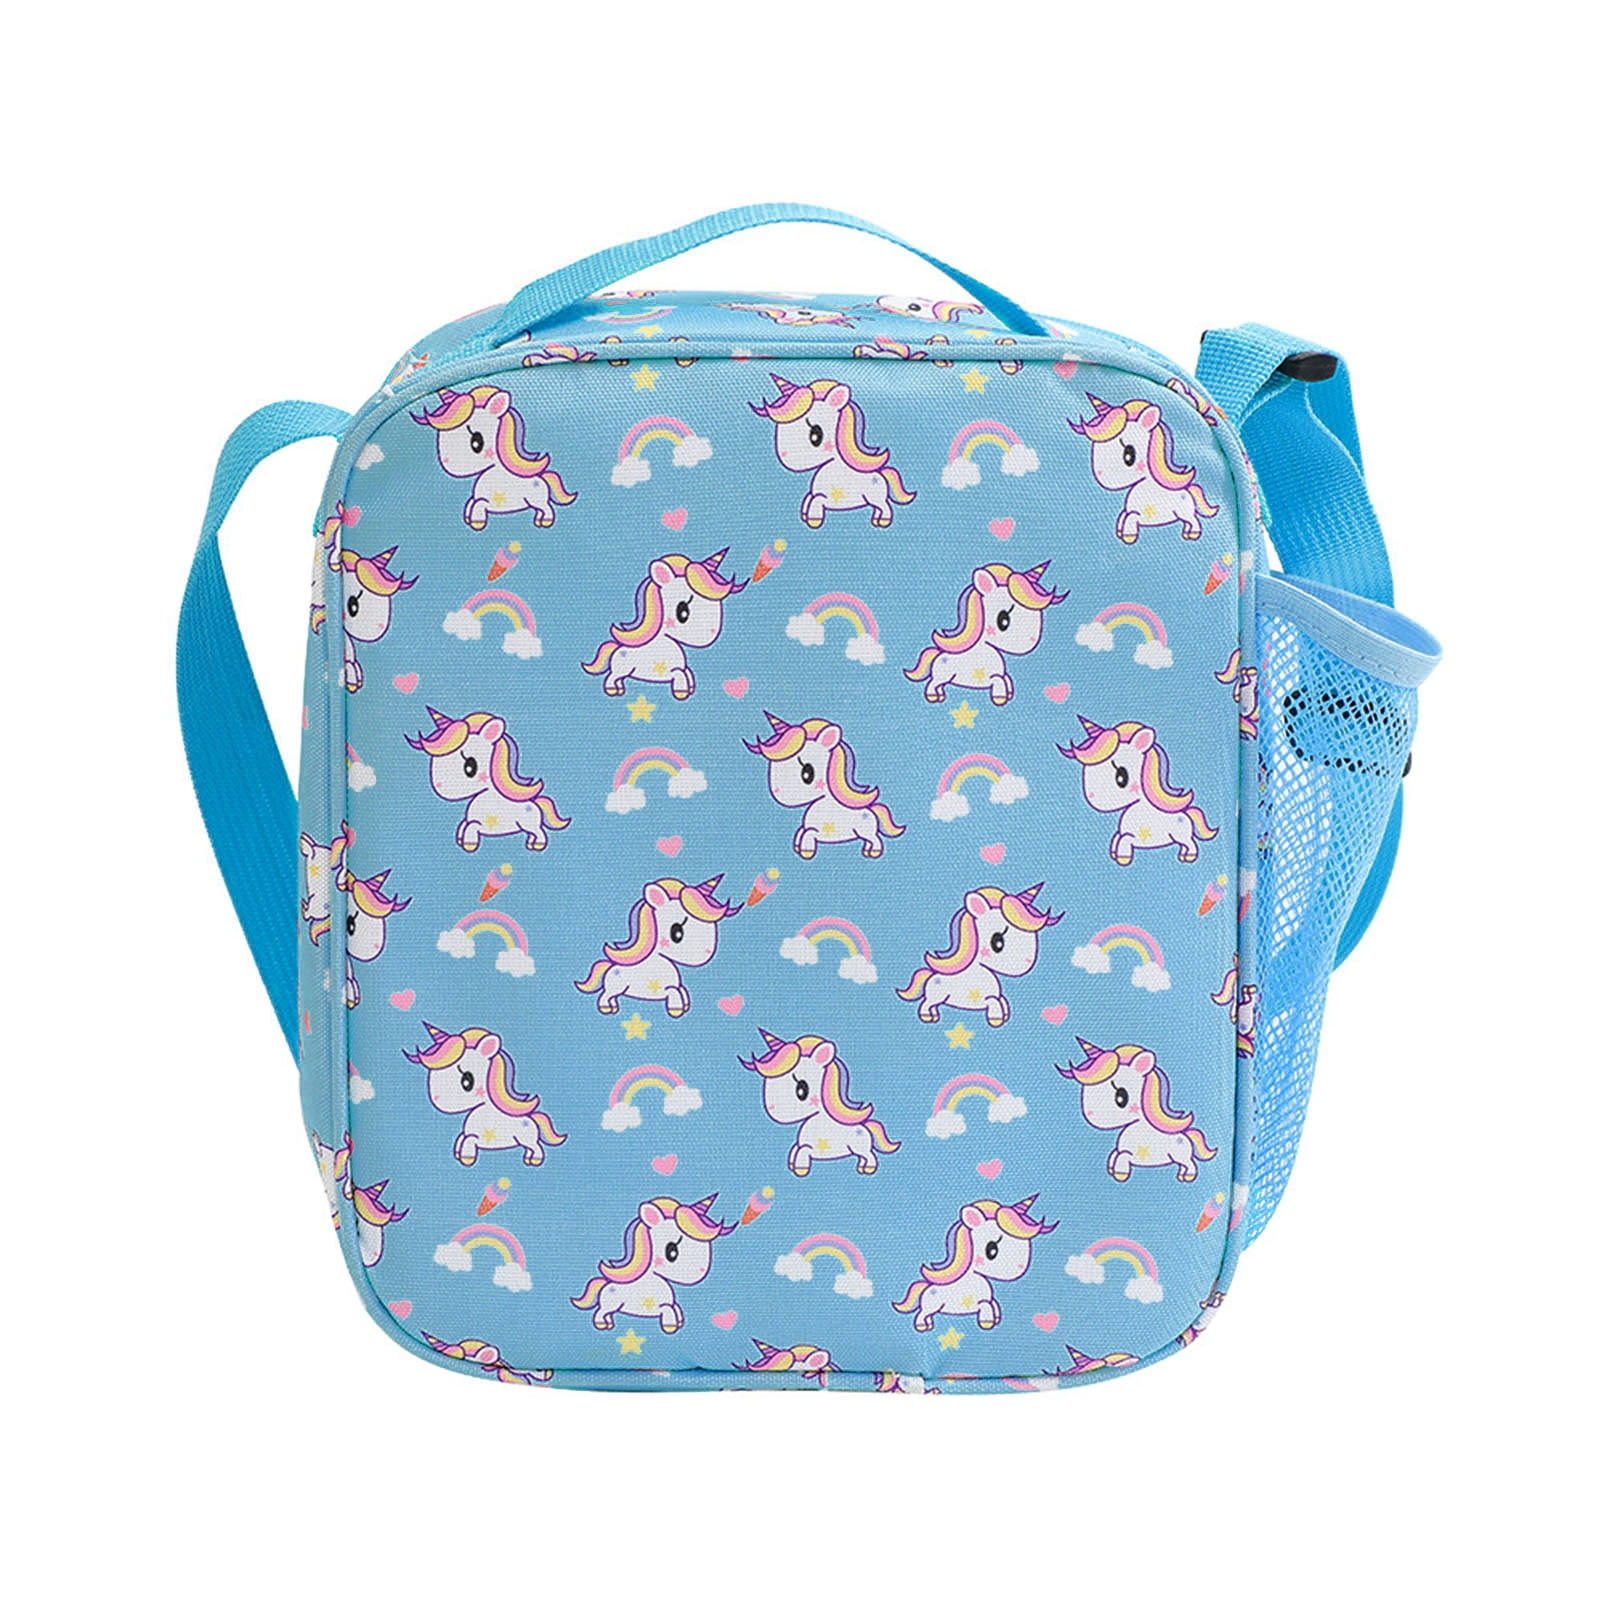 COO&KOO Unicorn Lunch Box Lunch Bag Set - Insulated Lunch Bag with